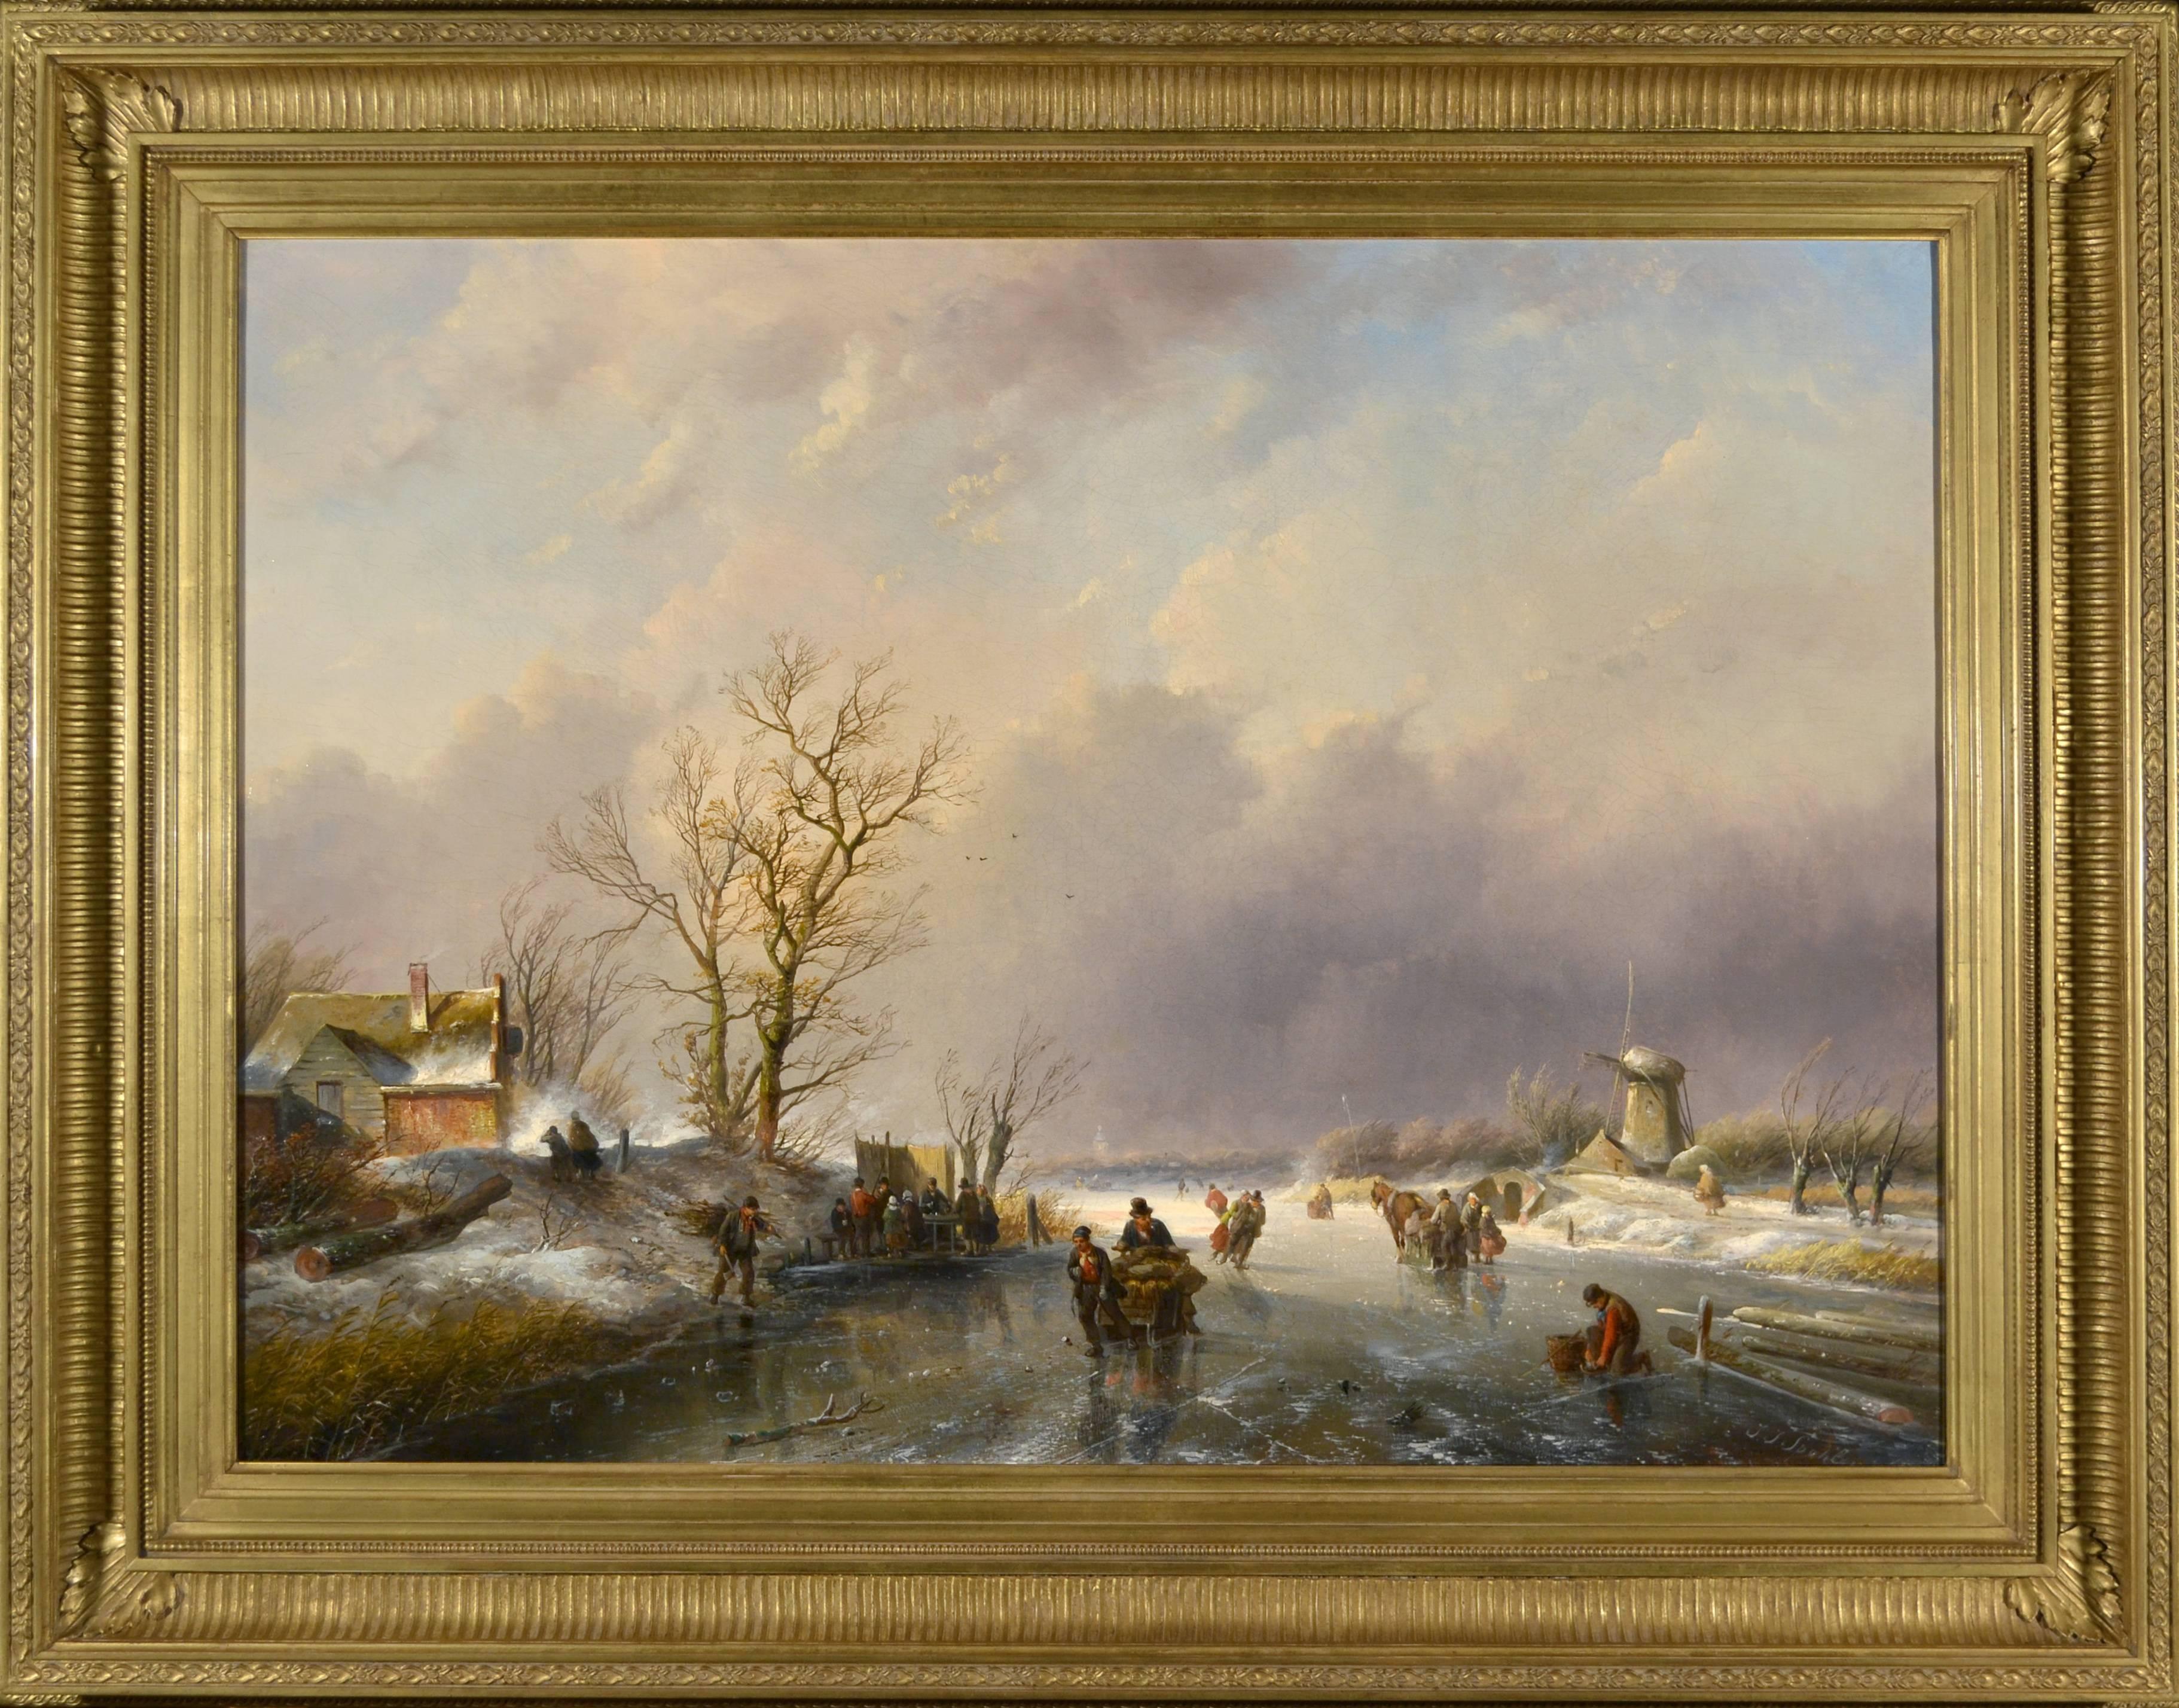 This oil painting is one of Jan Jacob Spohler’s finest examples and is signed and dated (1860). He was born in Nederhorst den Berg, Amsterdam on 7 November 1811 and was an expert and winter landscapes and summer landscapes. 

Oil on canvas 22¾ x